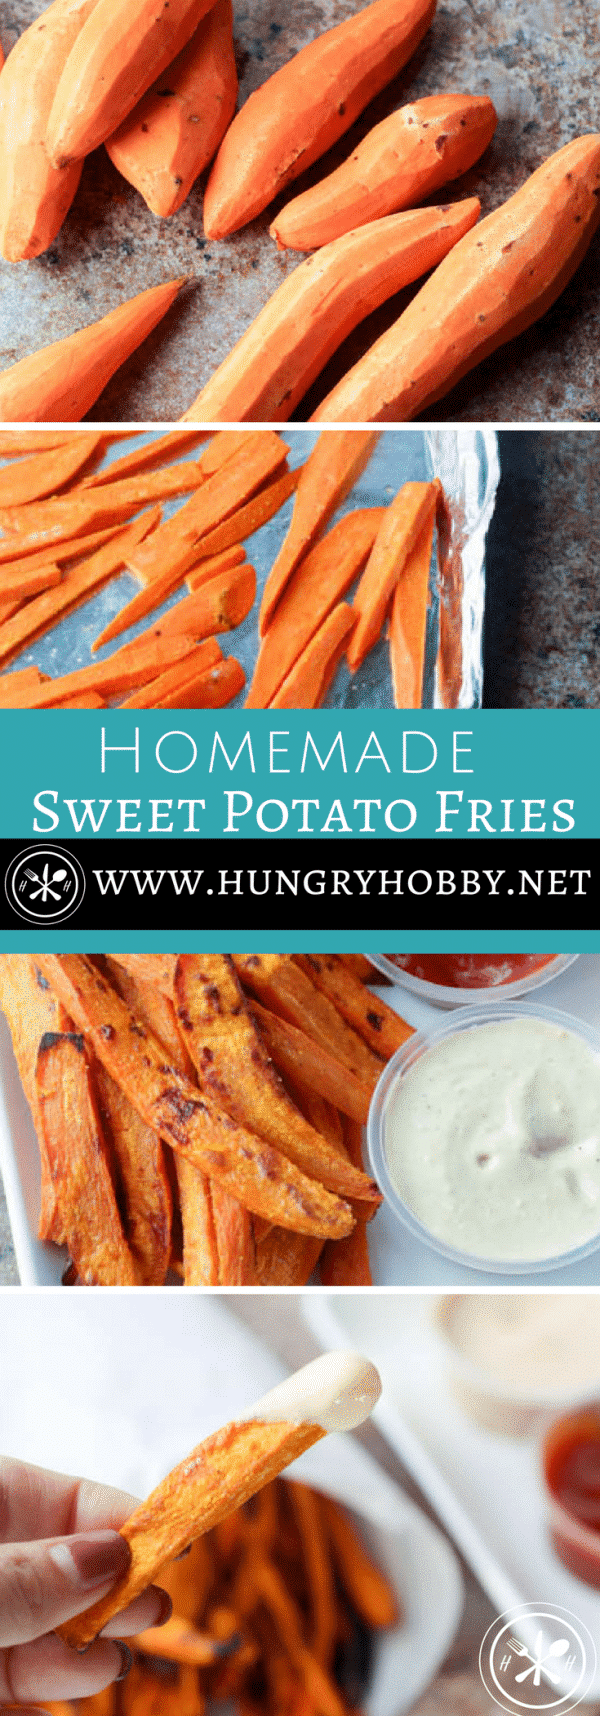 are sweet potato fries healthier than french fries